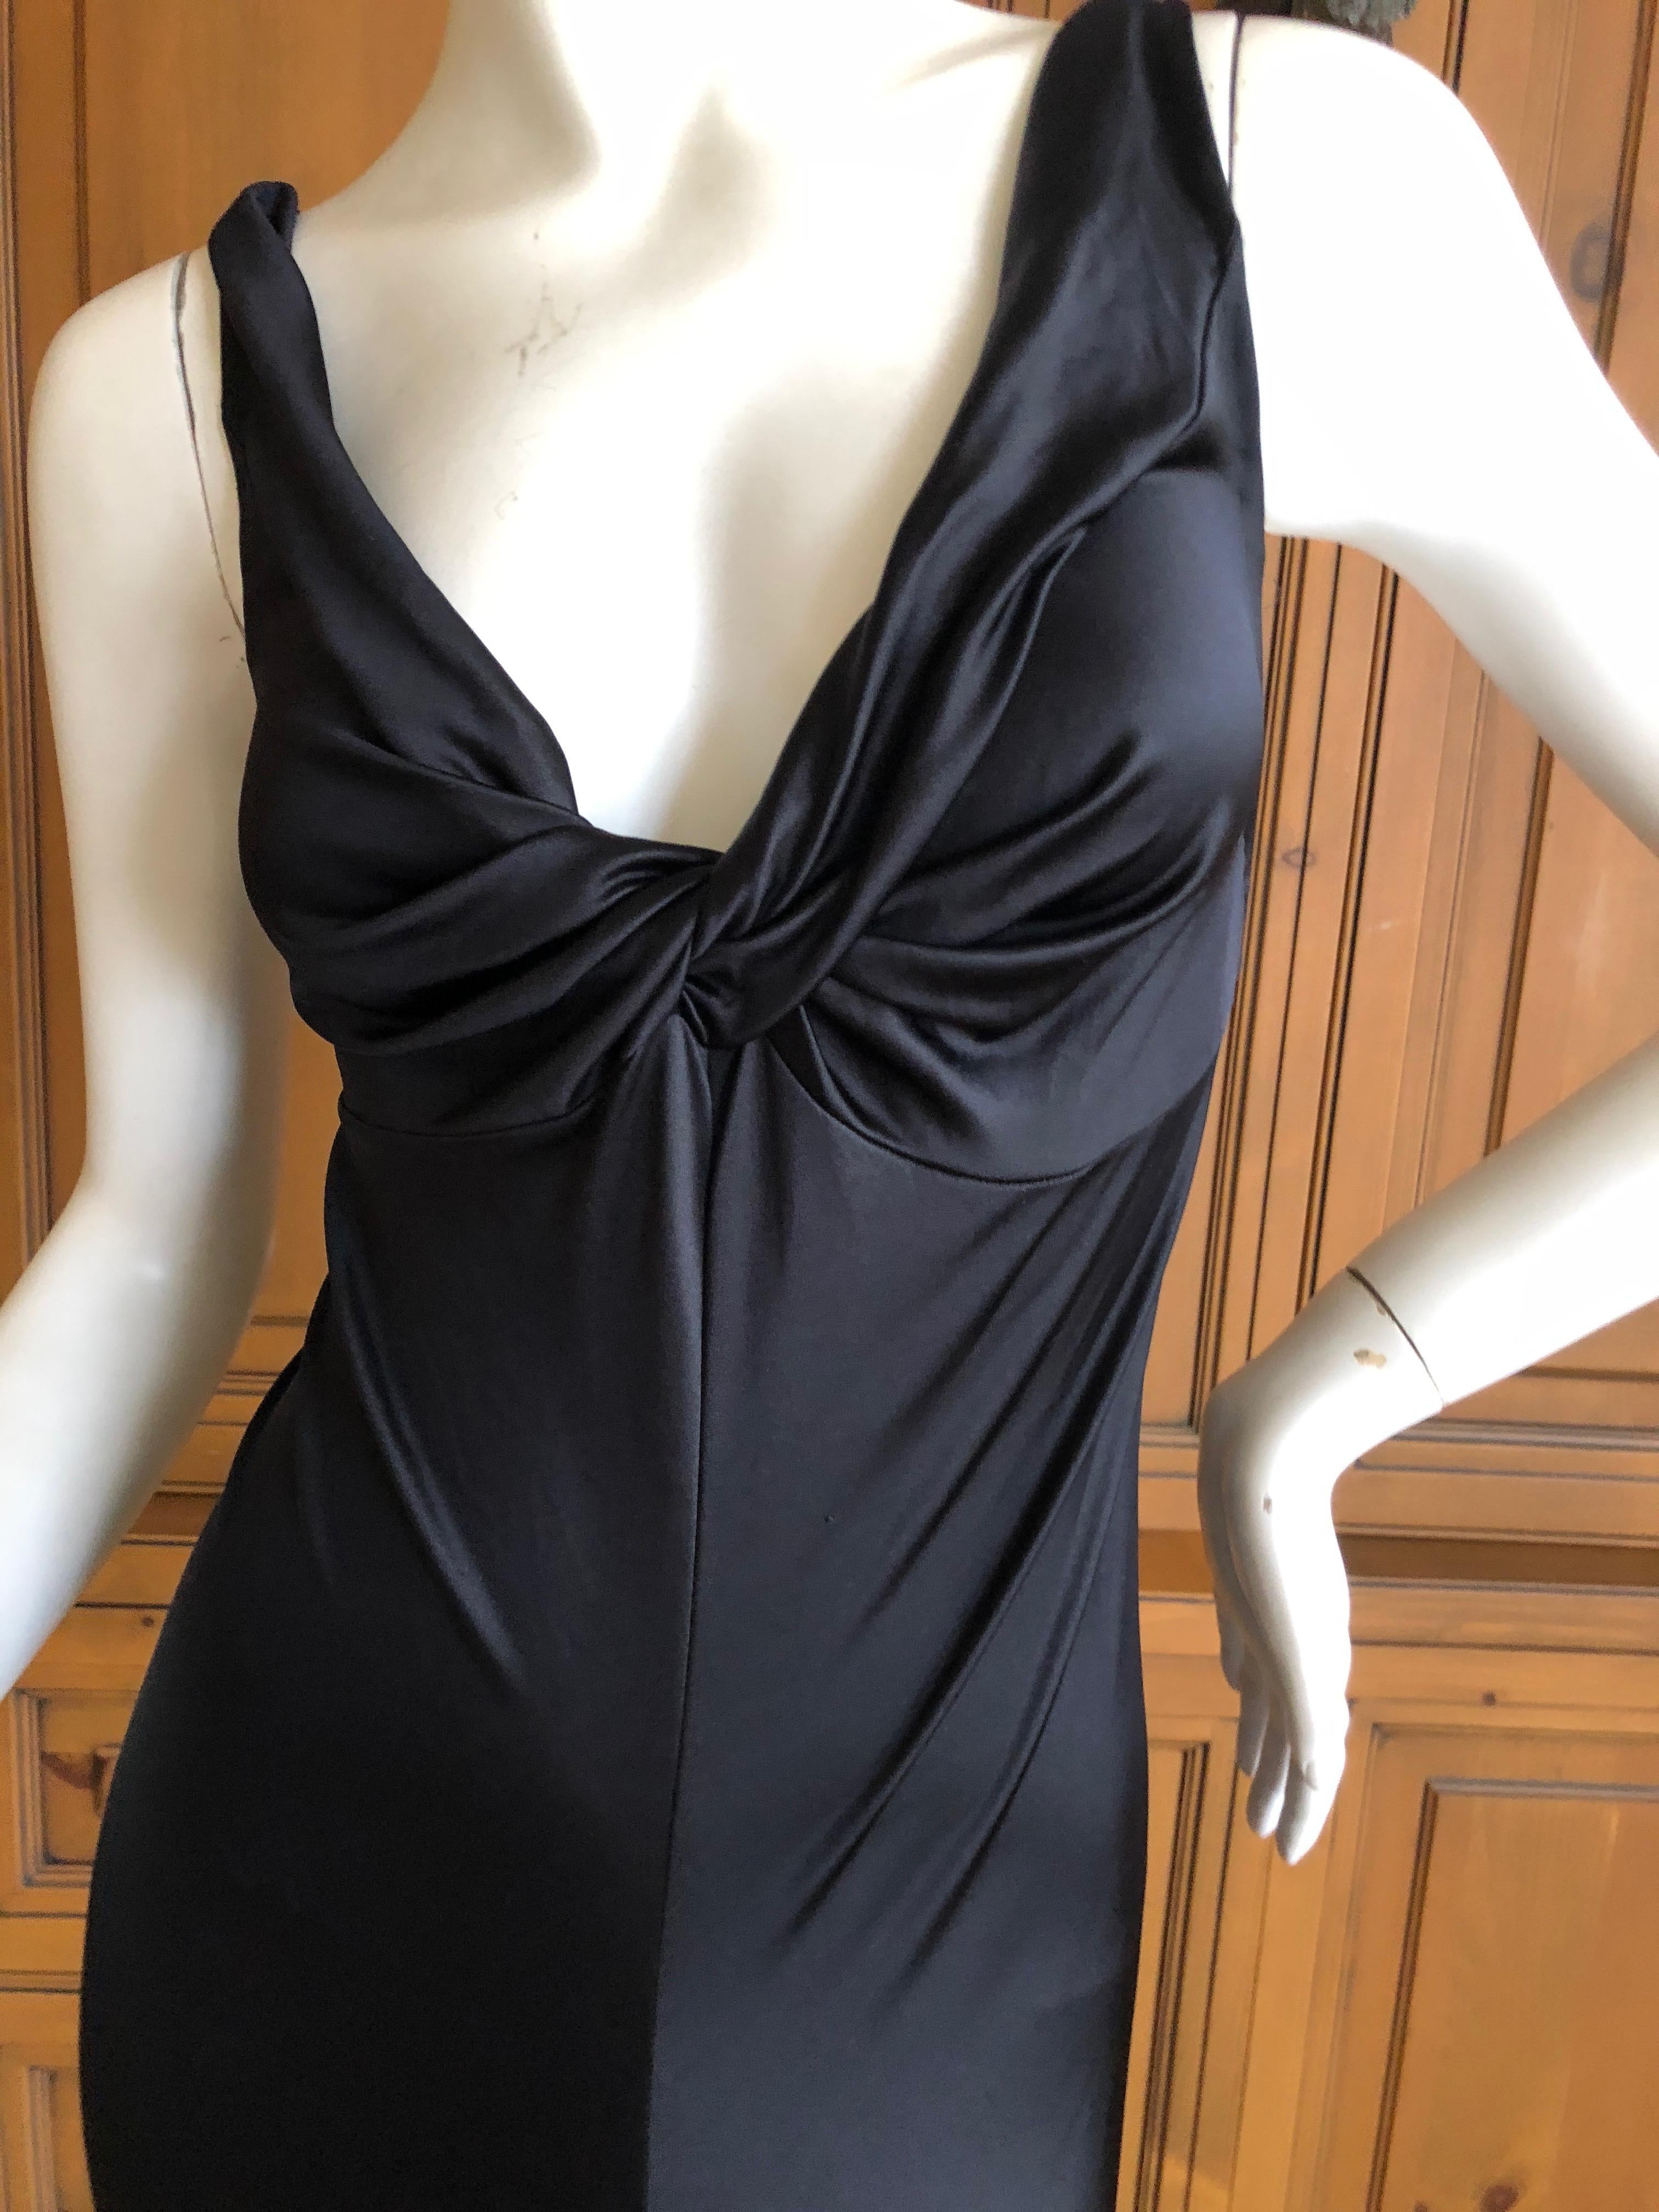 John Galliano Vintage Low Cut Black Bias Cut Knot Dress, 1990s  In Excellent Condition For Sale In Cloverdale, CA